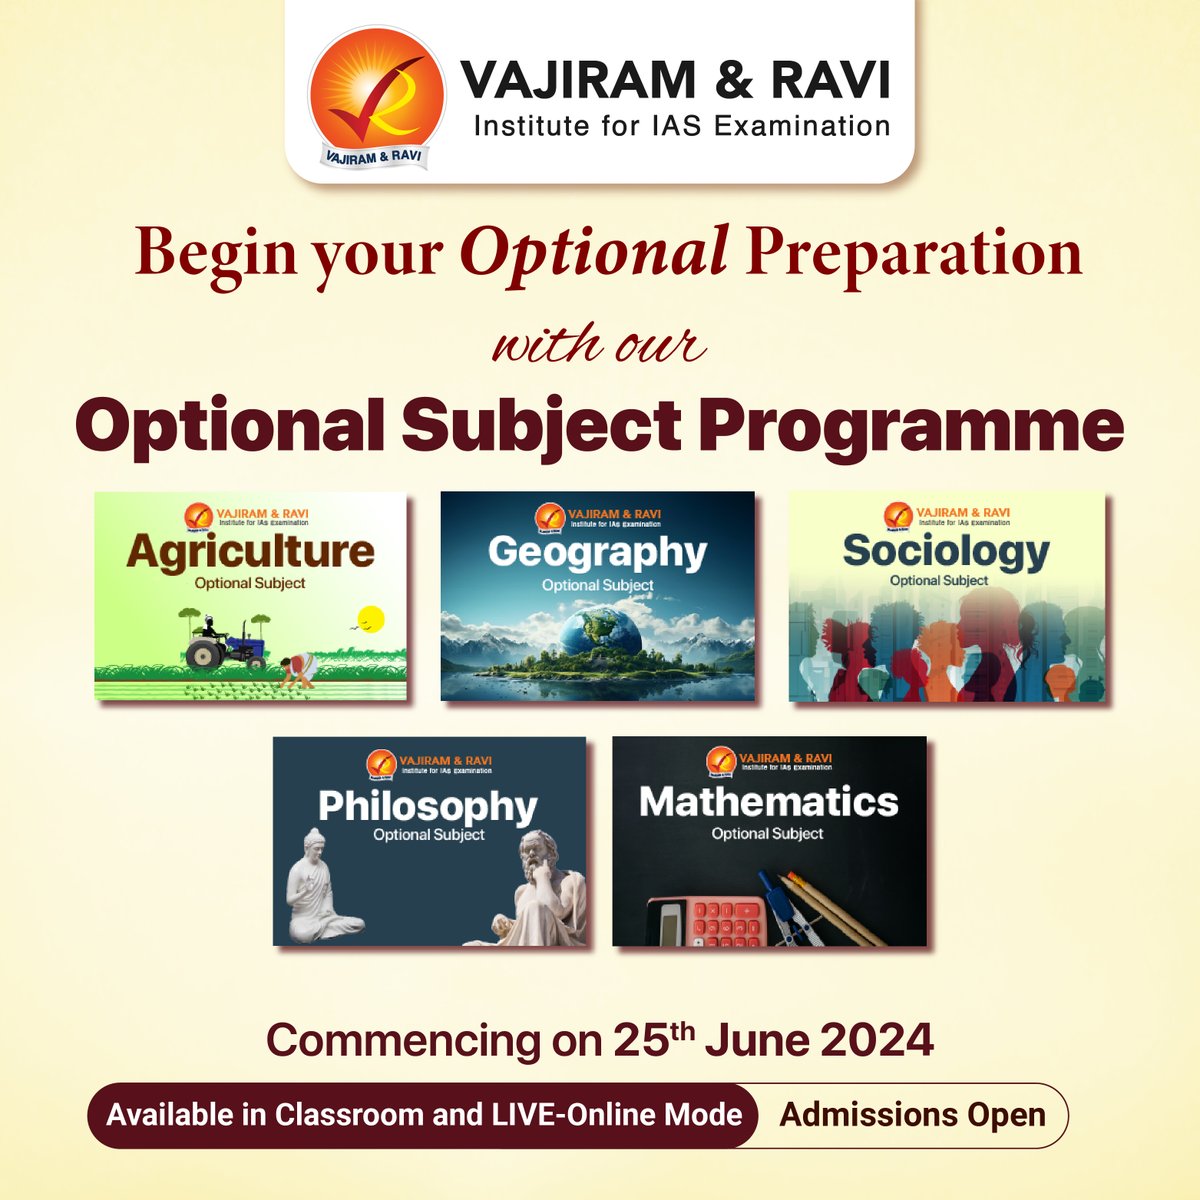 Our Optional Subject Programme for UPSC 2025 is designed to offer a wide range of optional subjects, ensuring you have the best possible preparation. Learn More: bit.ly/vajiram-option… #upsc #upscaspirant #upscexam #upscoptional#optionalsubject #optionalcoaching #upscias